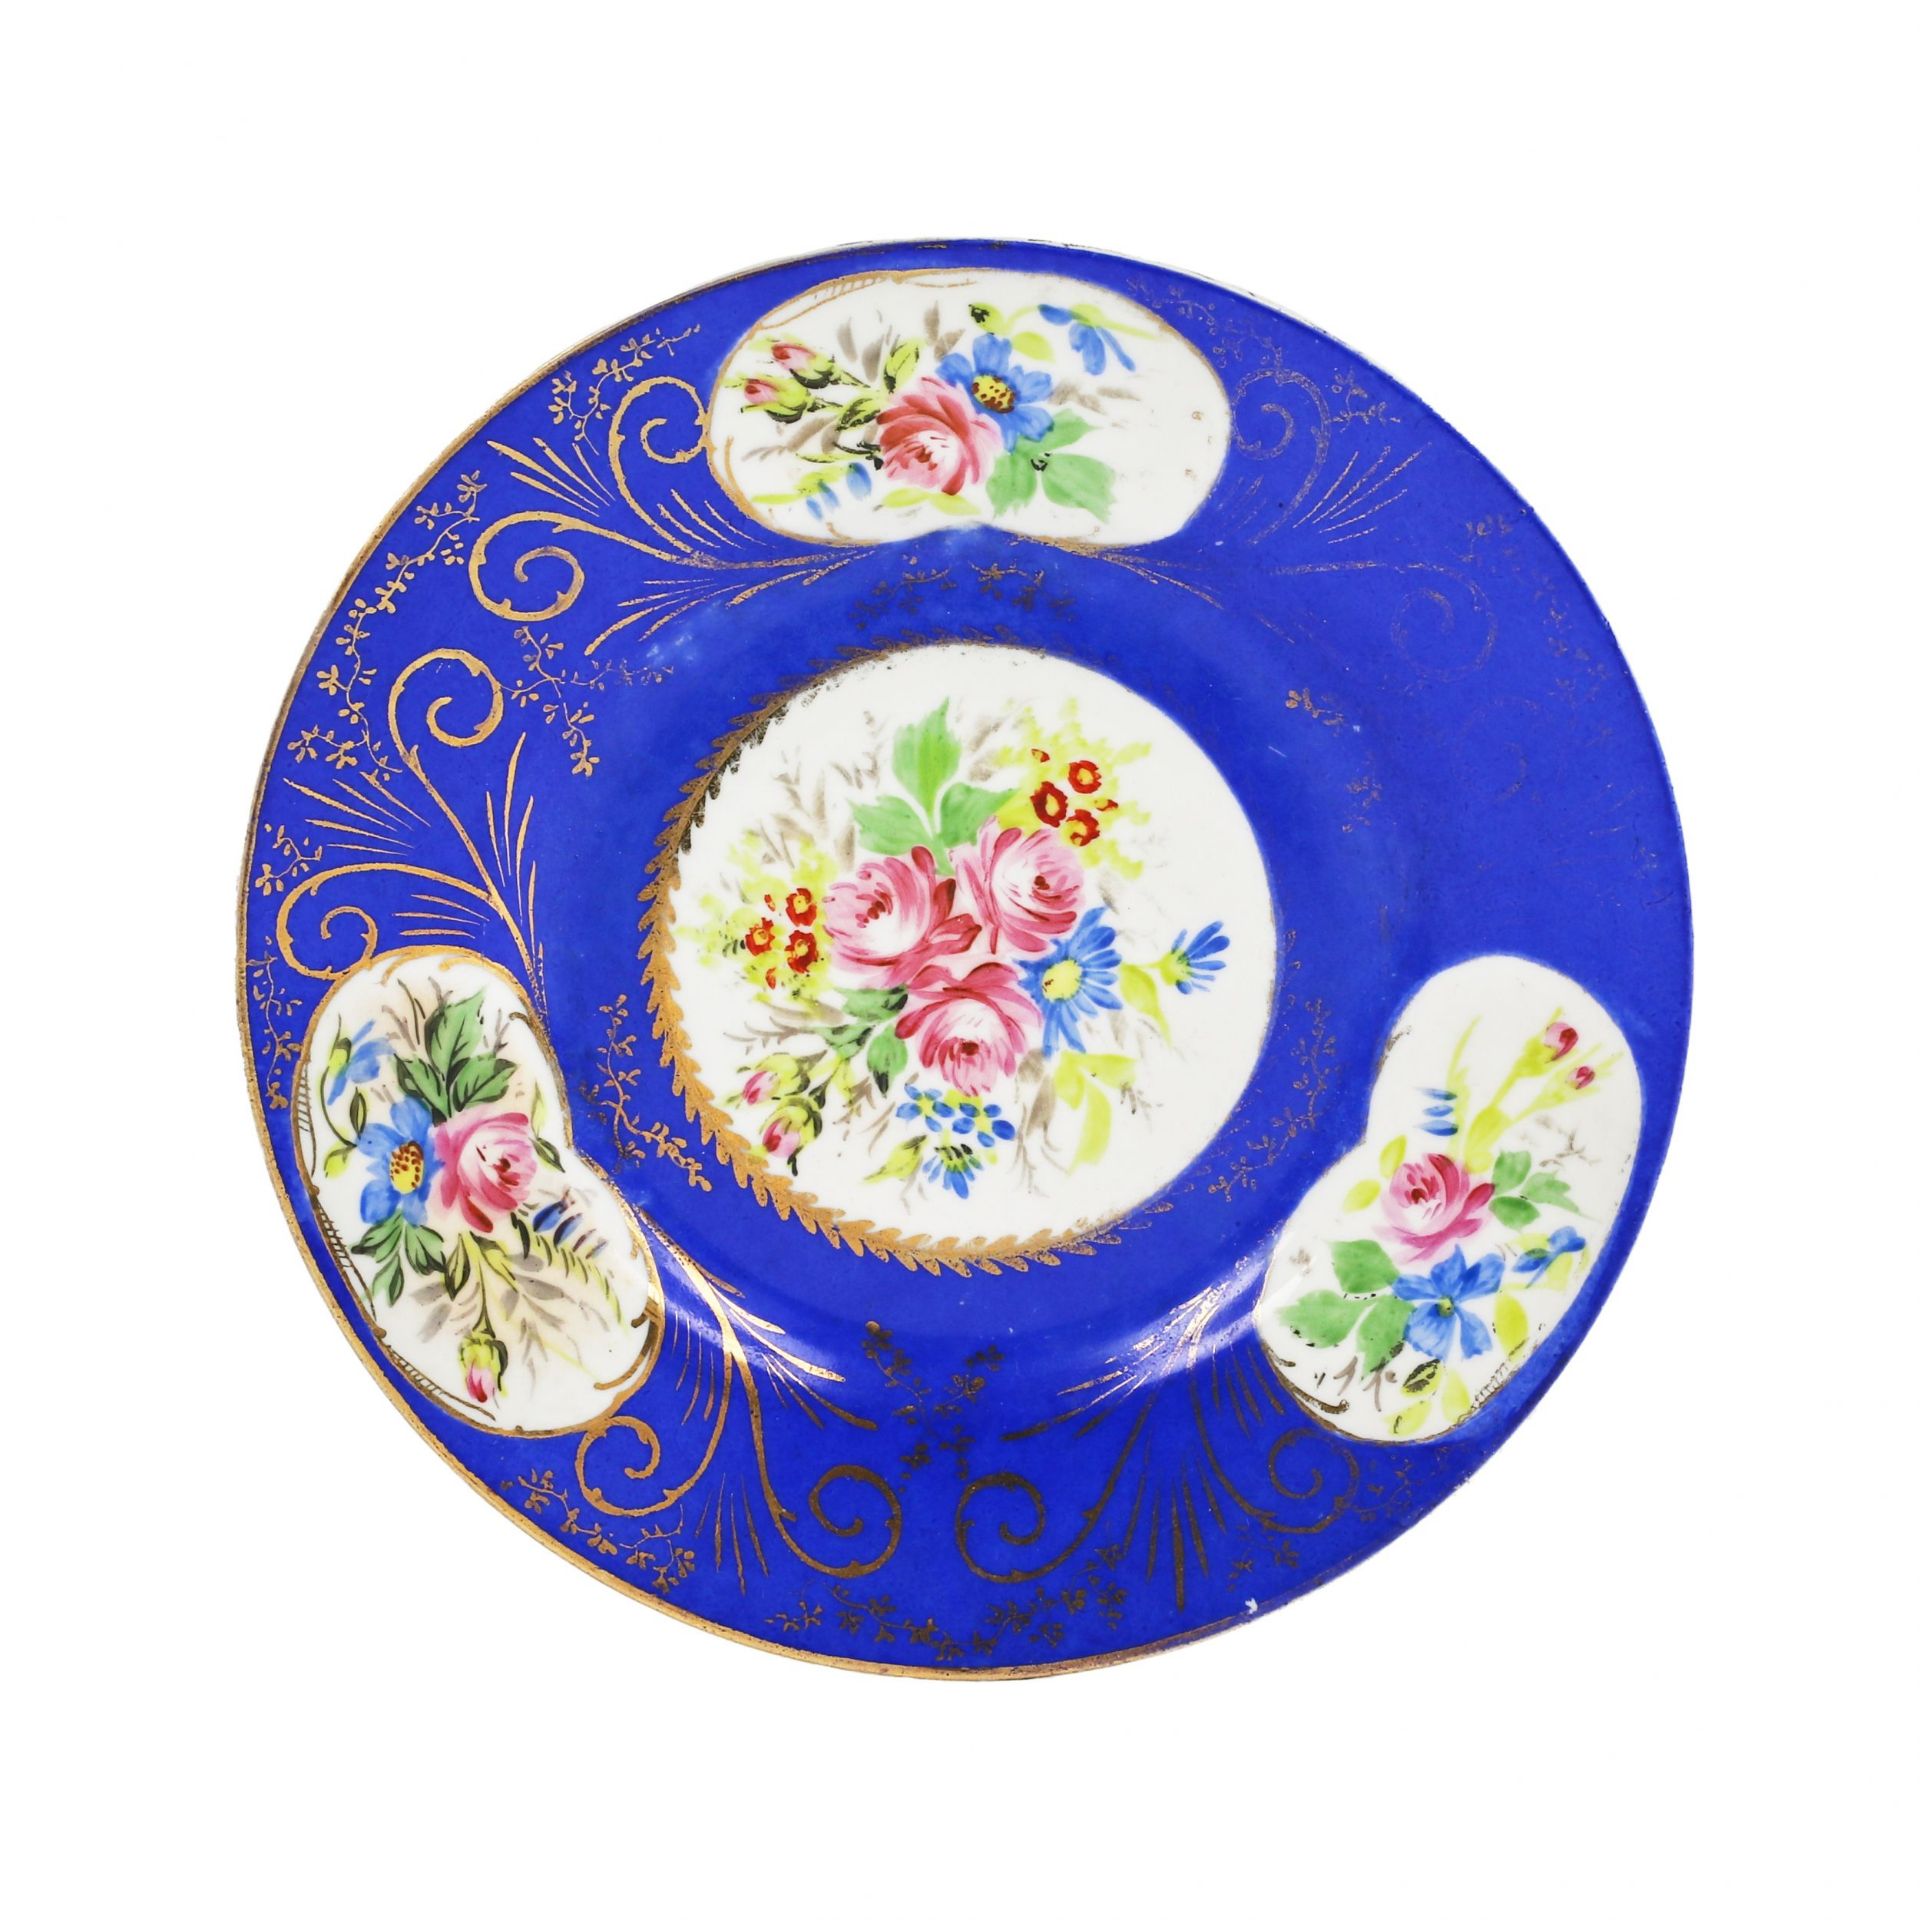 Five dishes and plates from Popov`s factory. 19th century. - Image 8 of 13